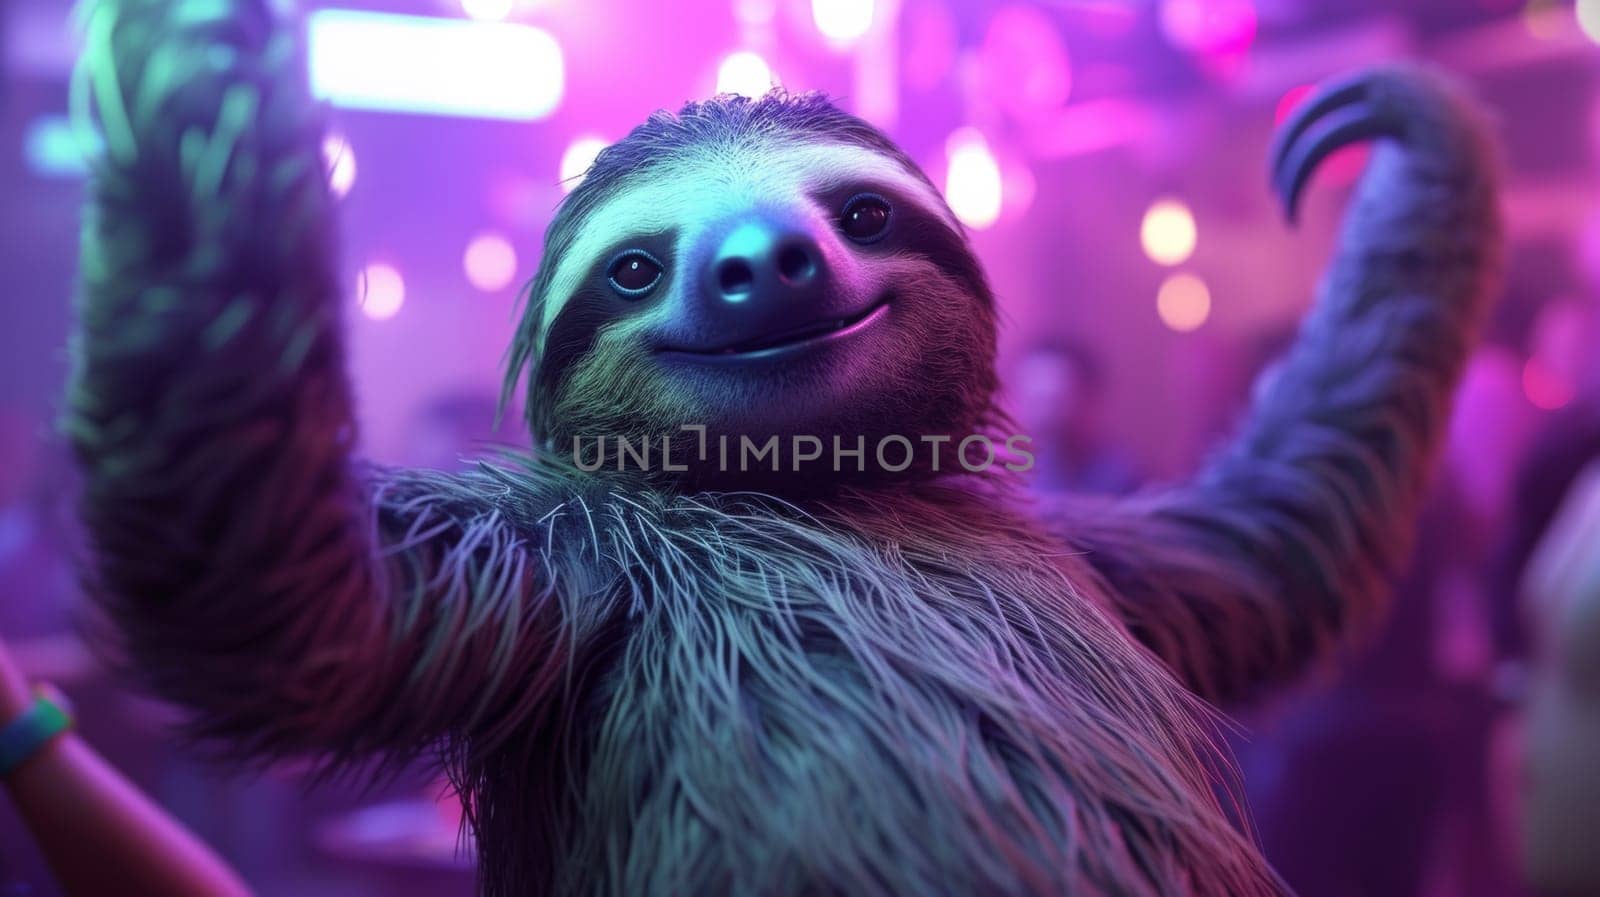 A sloth is dancing in a nightclub with people around him